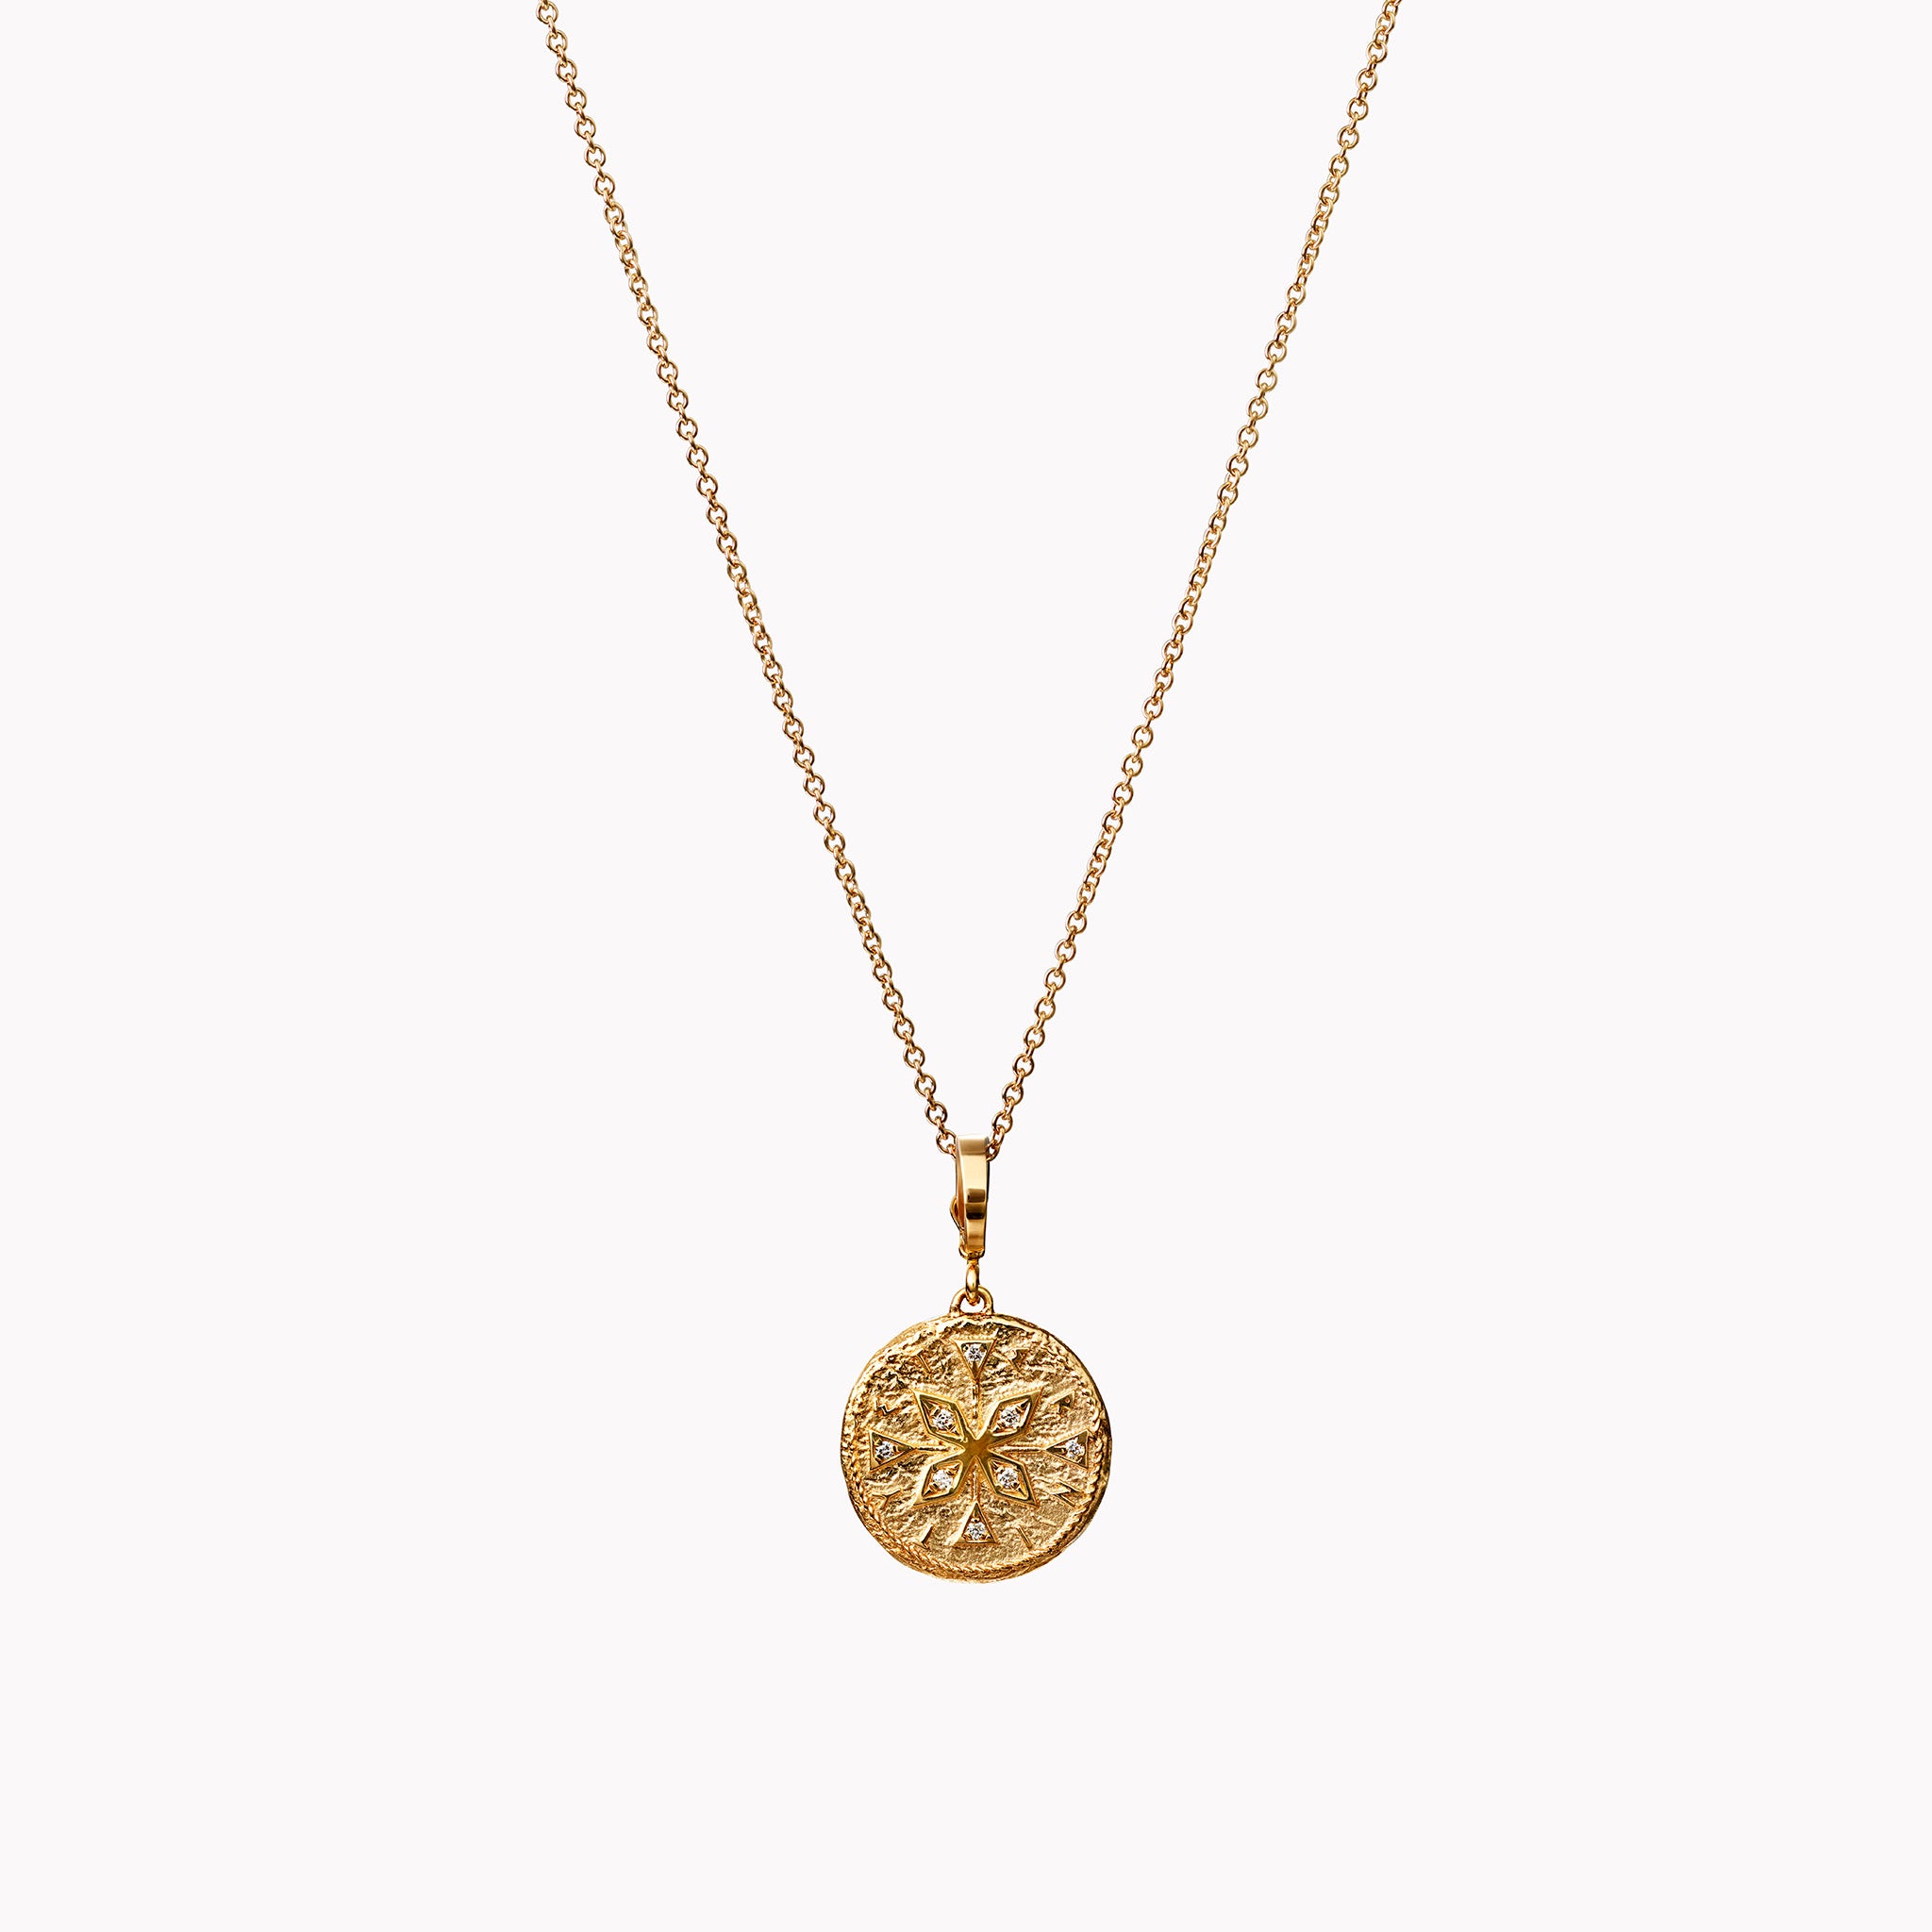 Small Compass Diamond Coin Charm Necklace